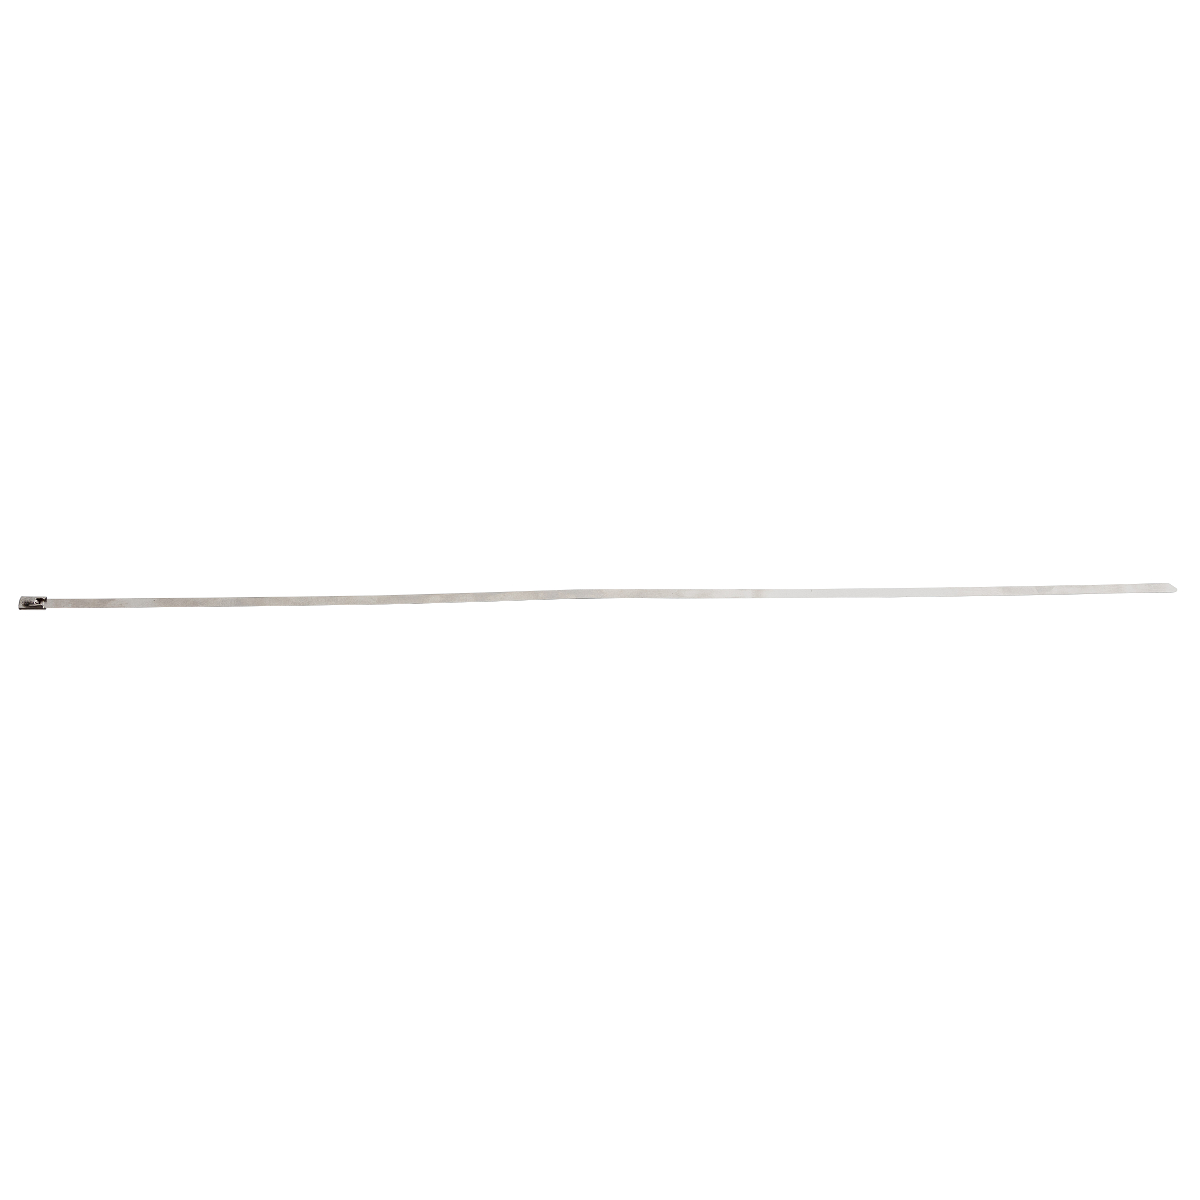 B7316 STEEL CABLE TIE, 4.50MM X 520MM